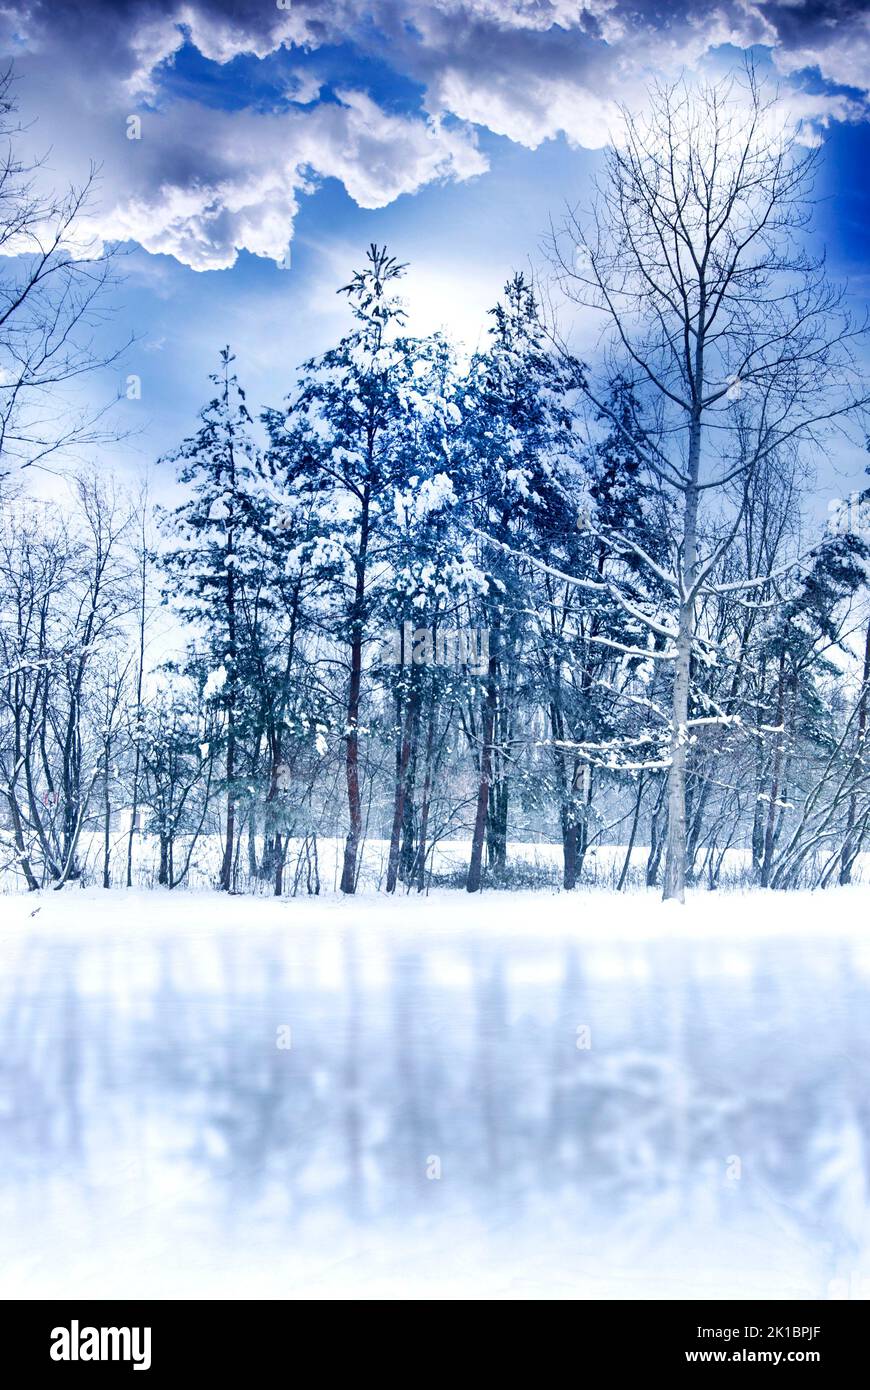 romantic winter landscape with snow, trees conifers, blue sky with white clouds and Stock Photo